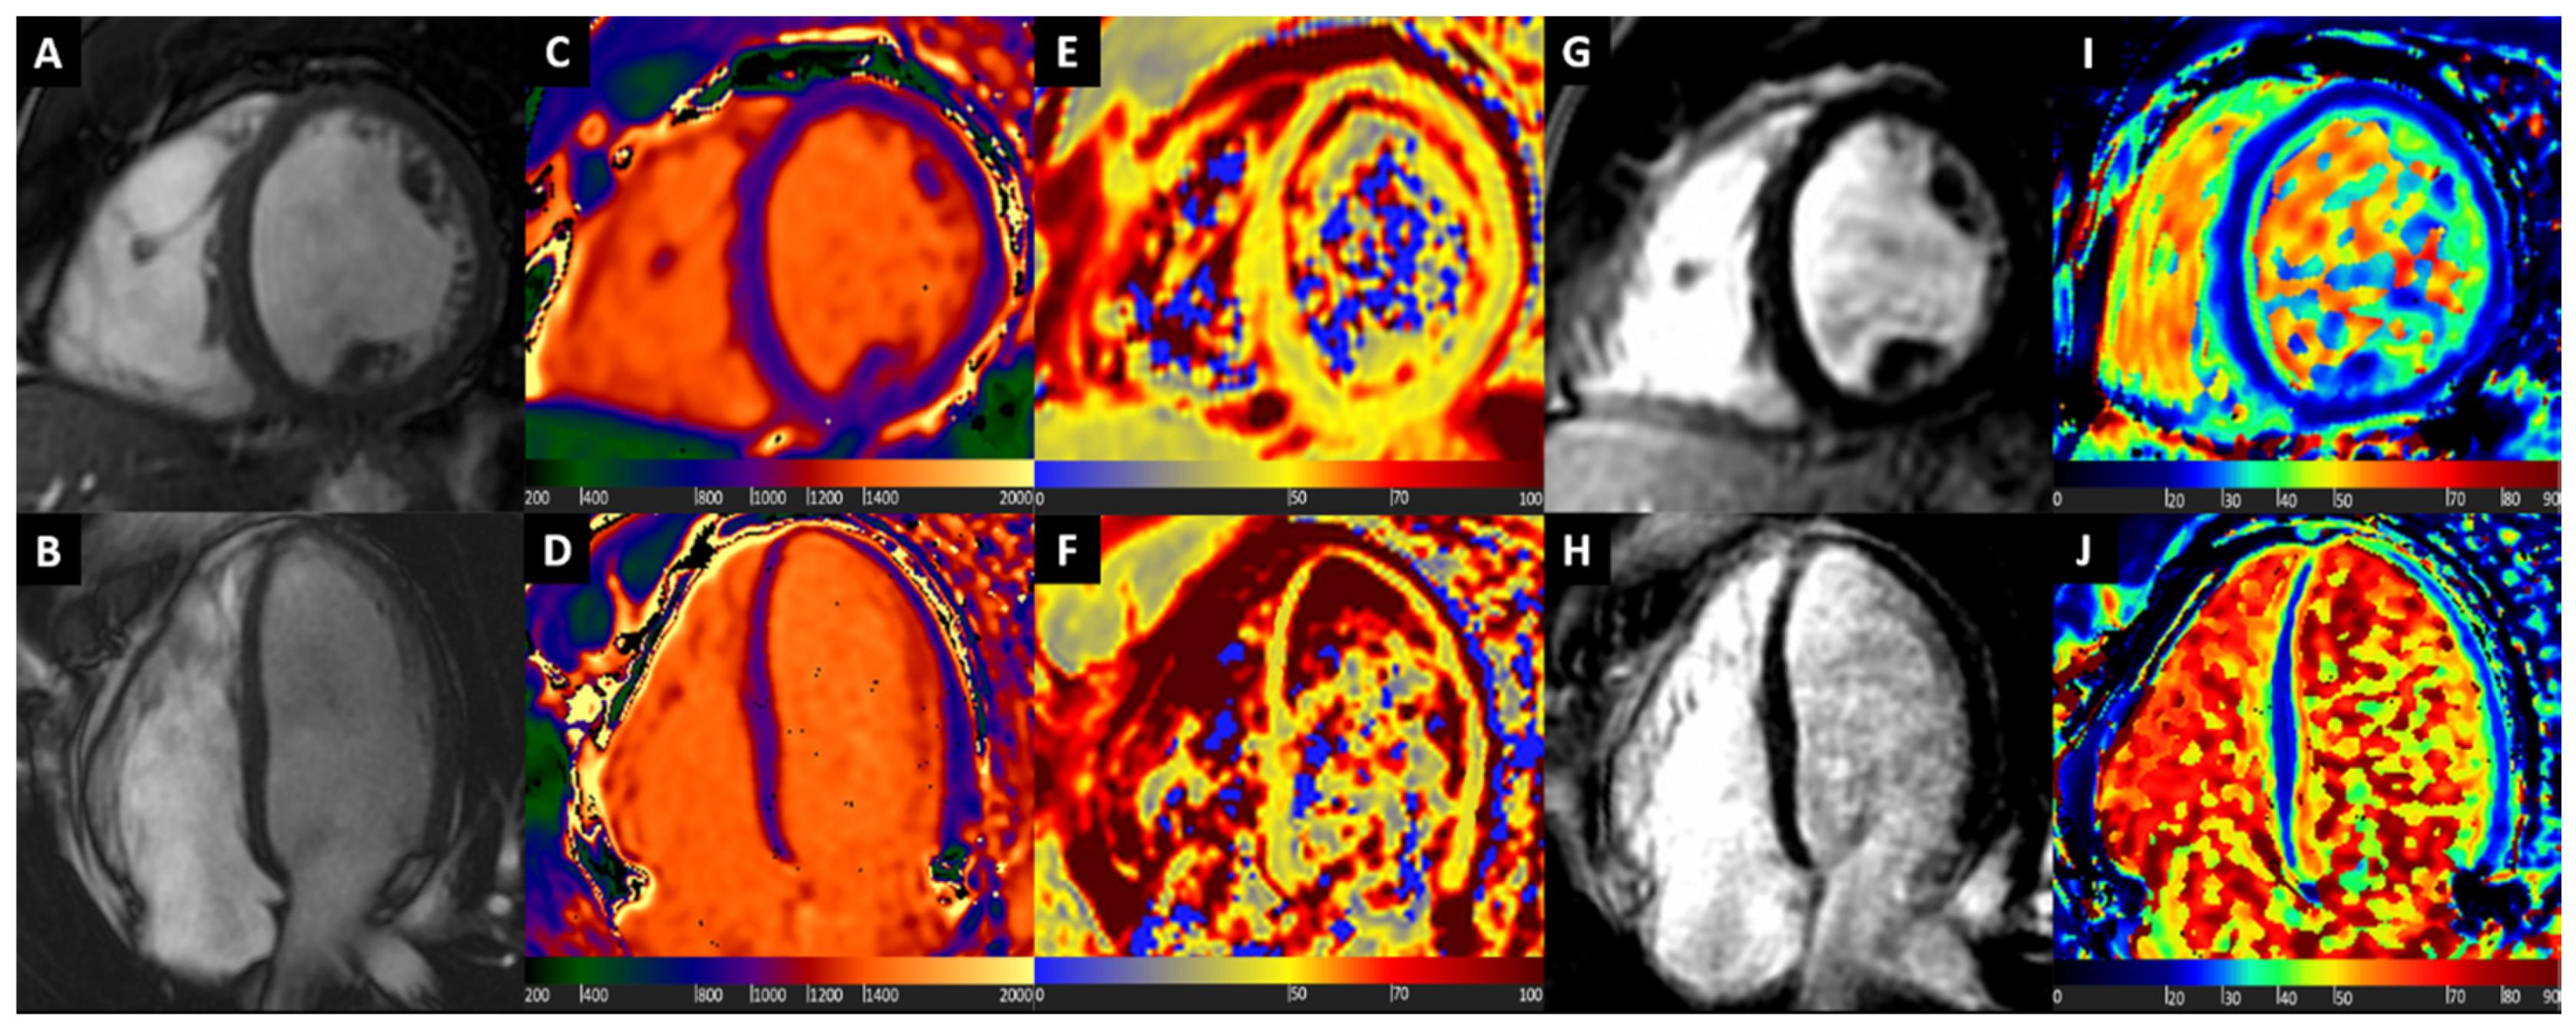 ASDAS states in patients stratified by baseline MRI/CRP status.